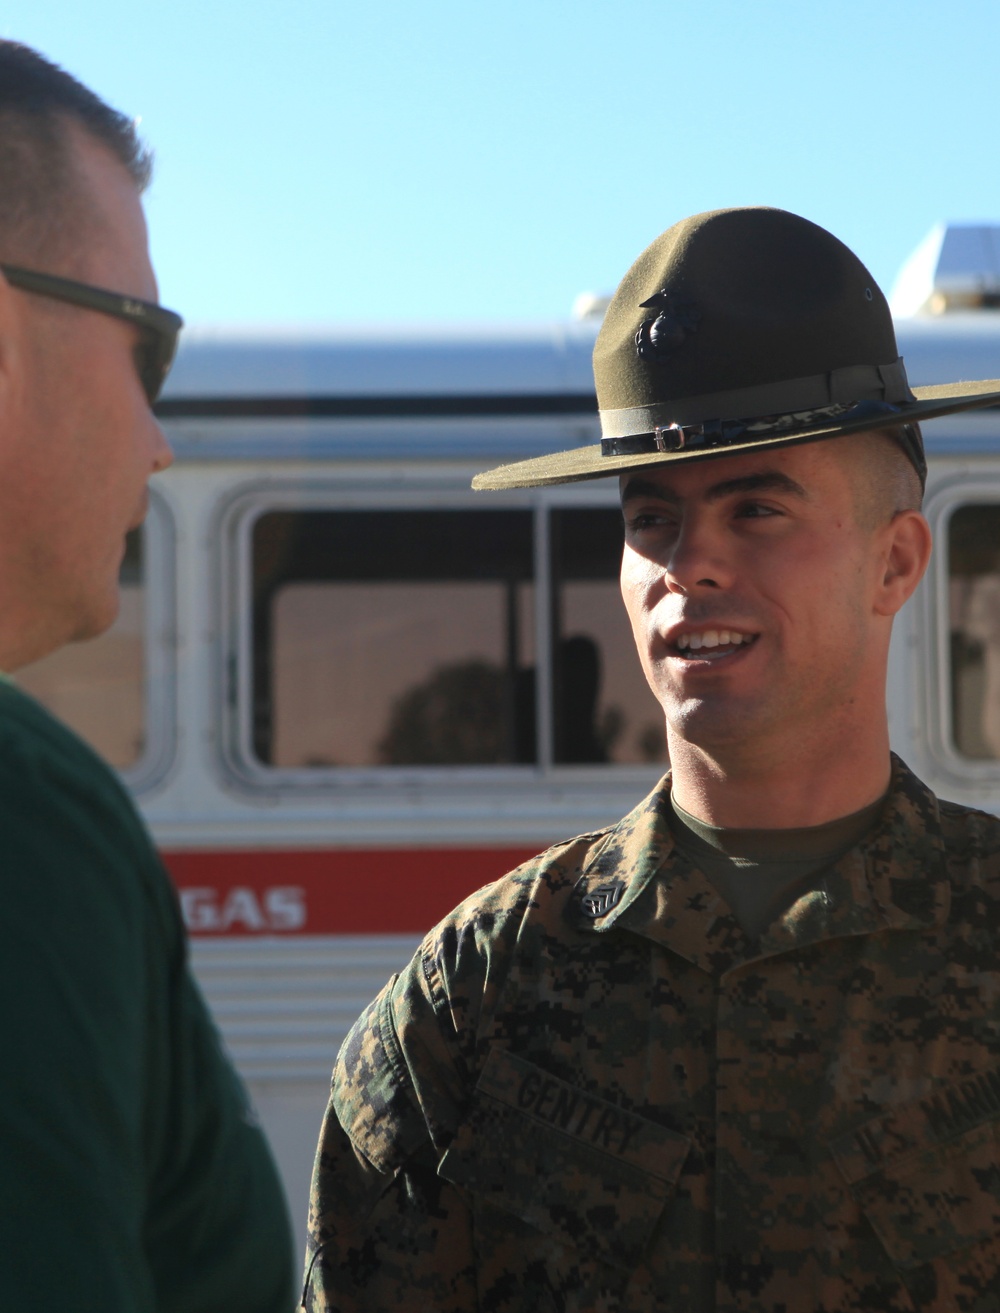 Educators discover ‘what it is to be a Marine’ through Educators Workshop